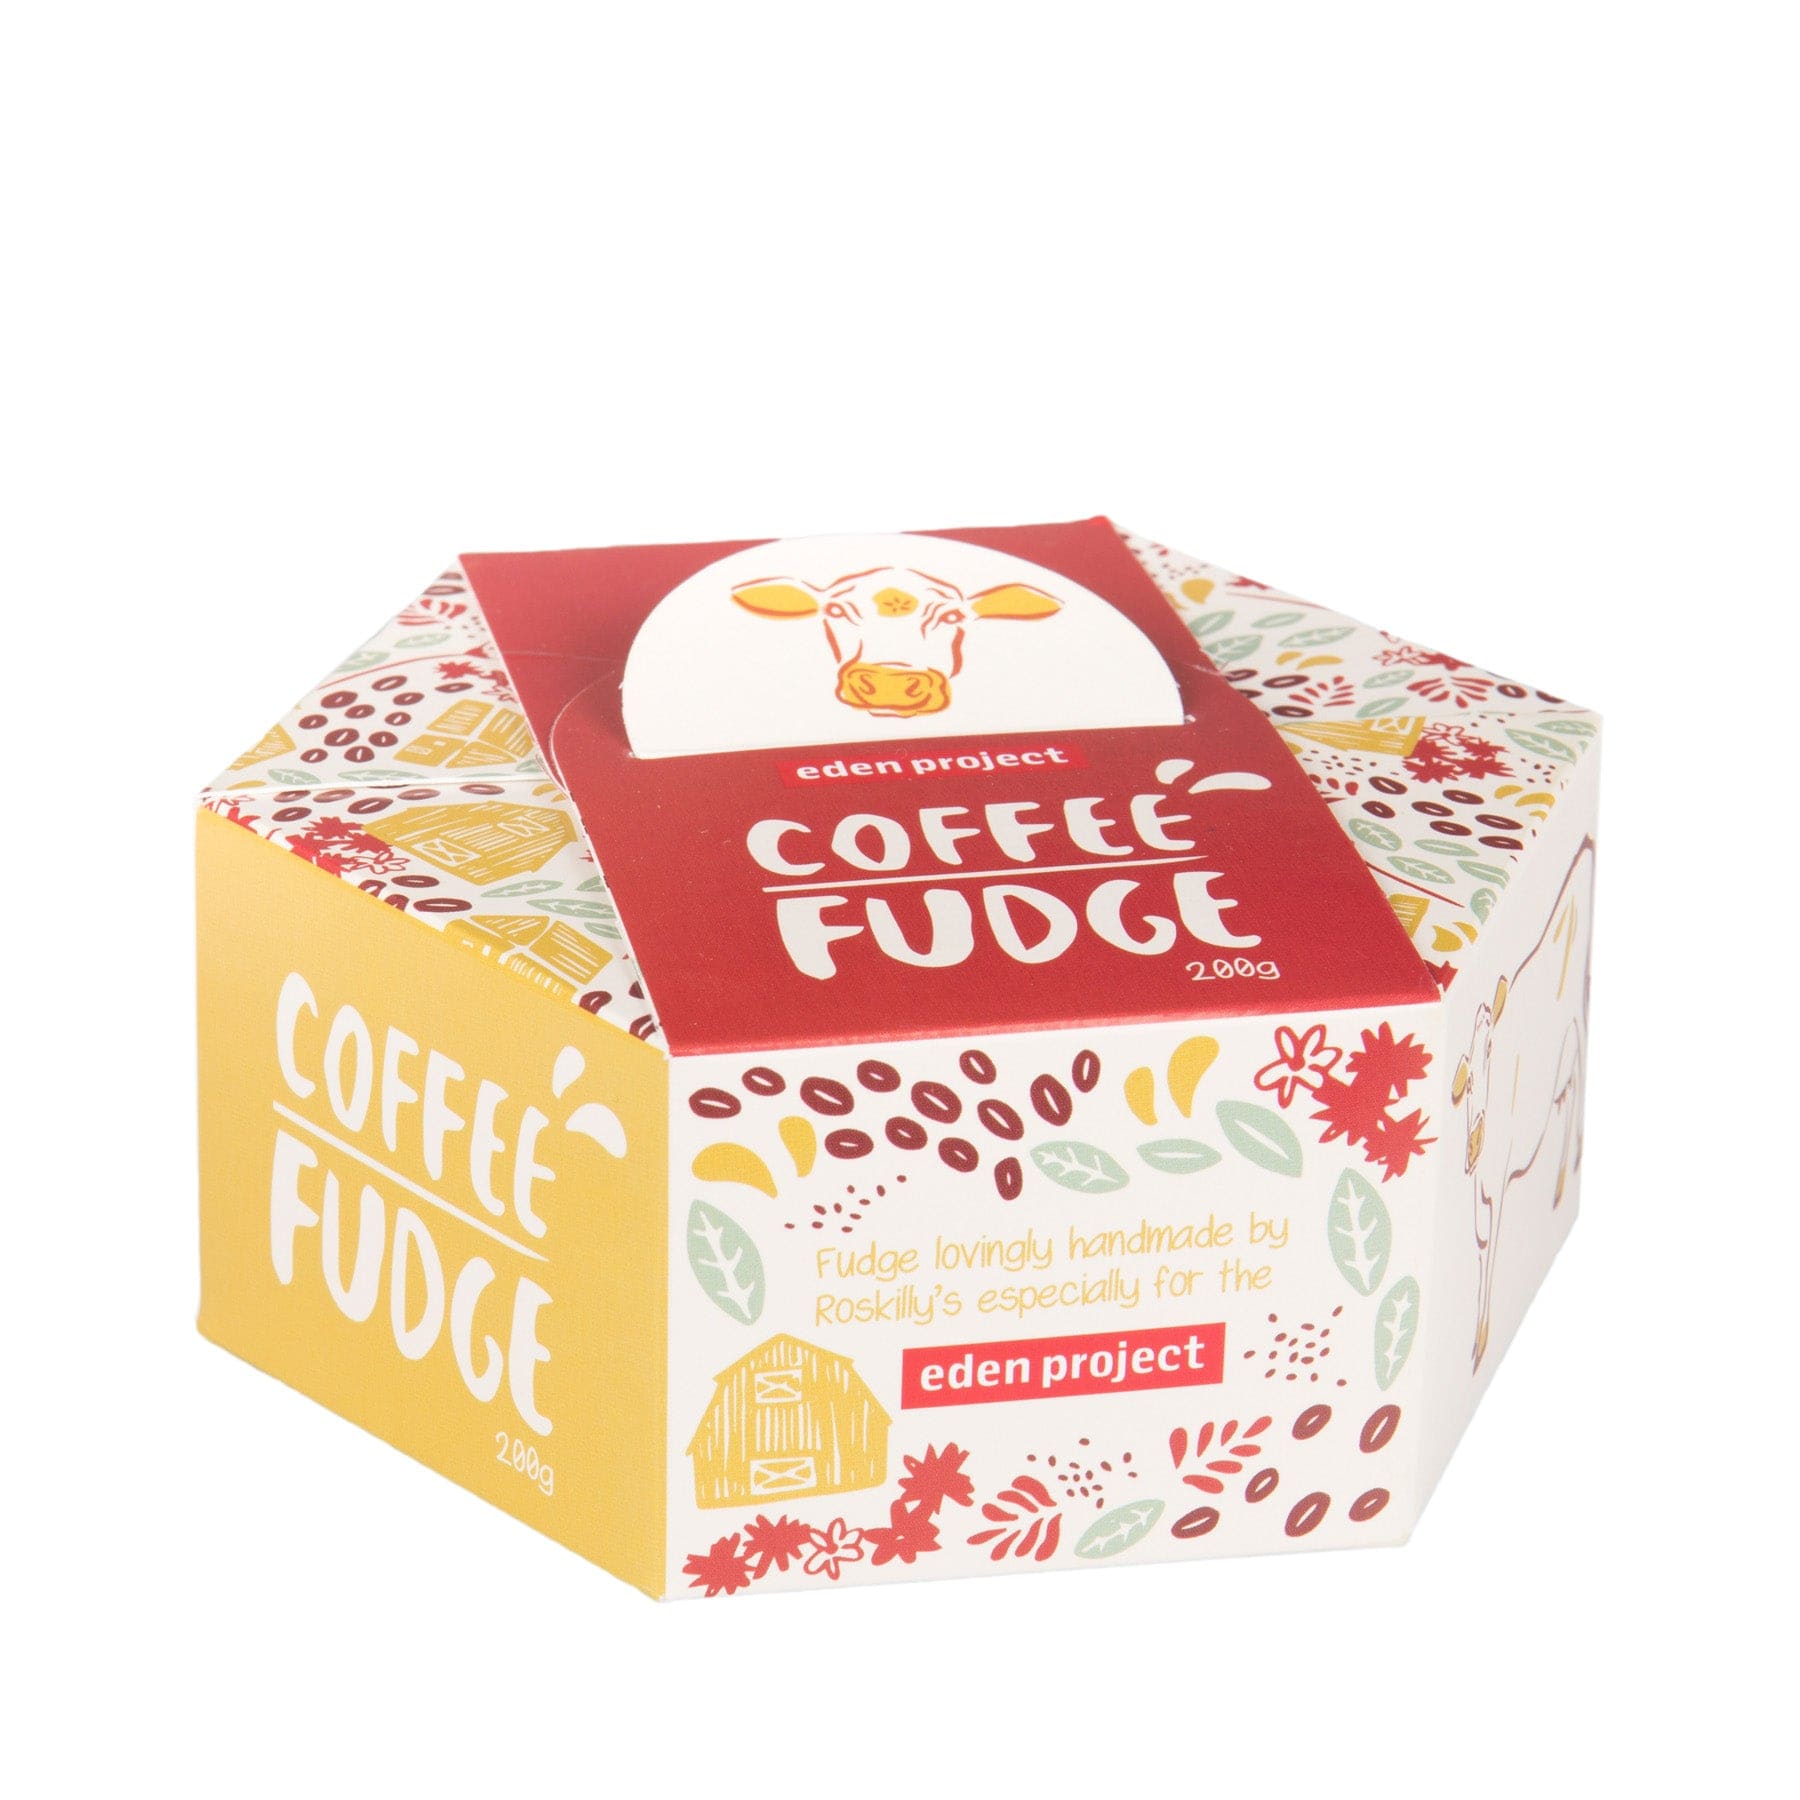 Eden Project Coffee Fudge packaging, 200g box of handmade fudge, gourmet sweet treat, colorful floral and coffee bean design on box, Roskilly's confectionery.